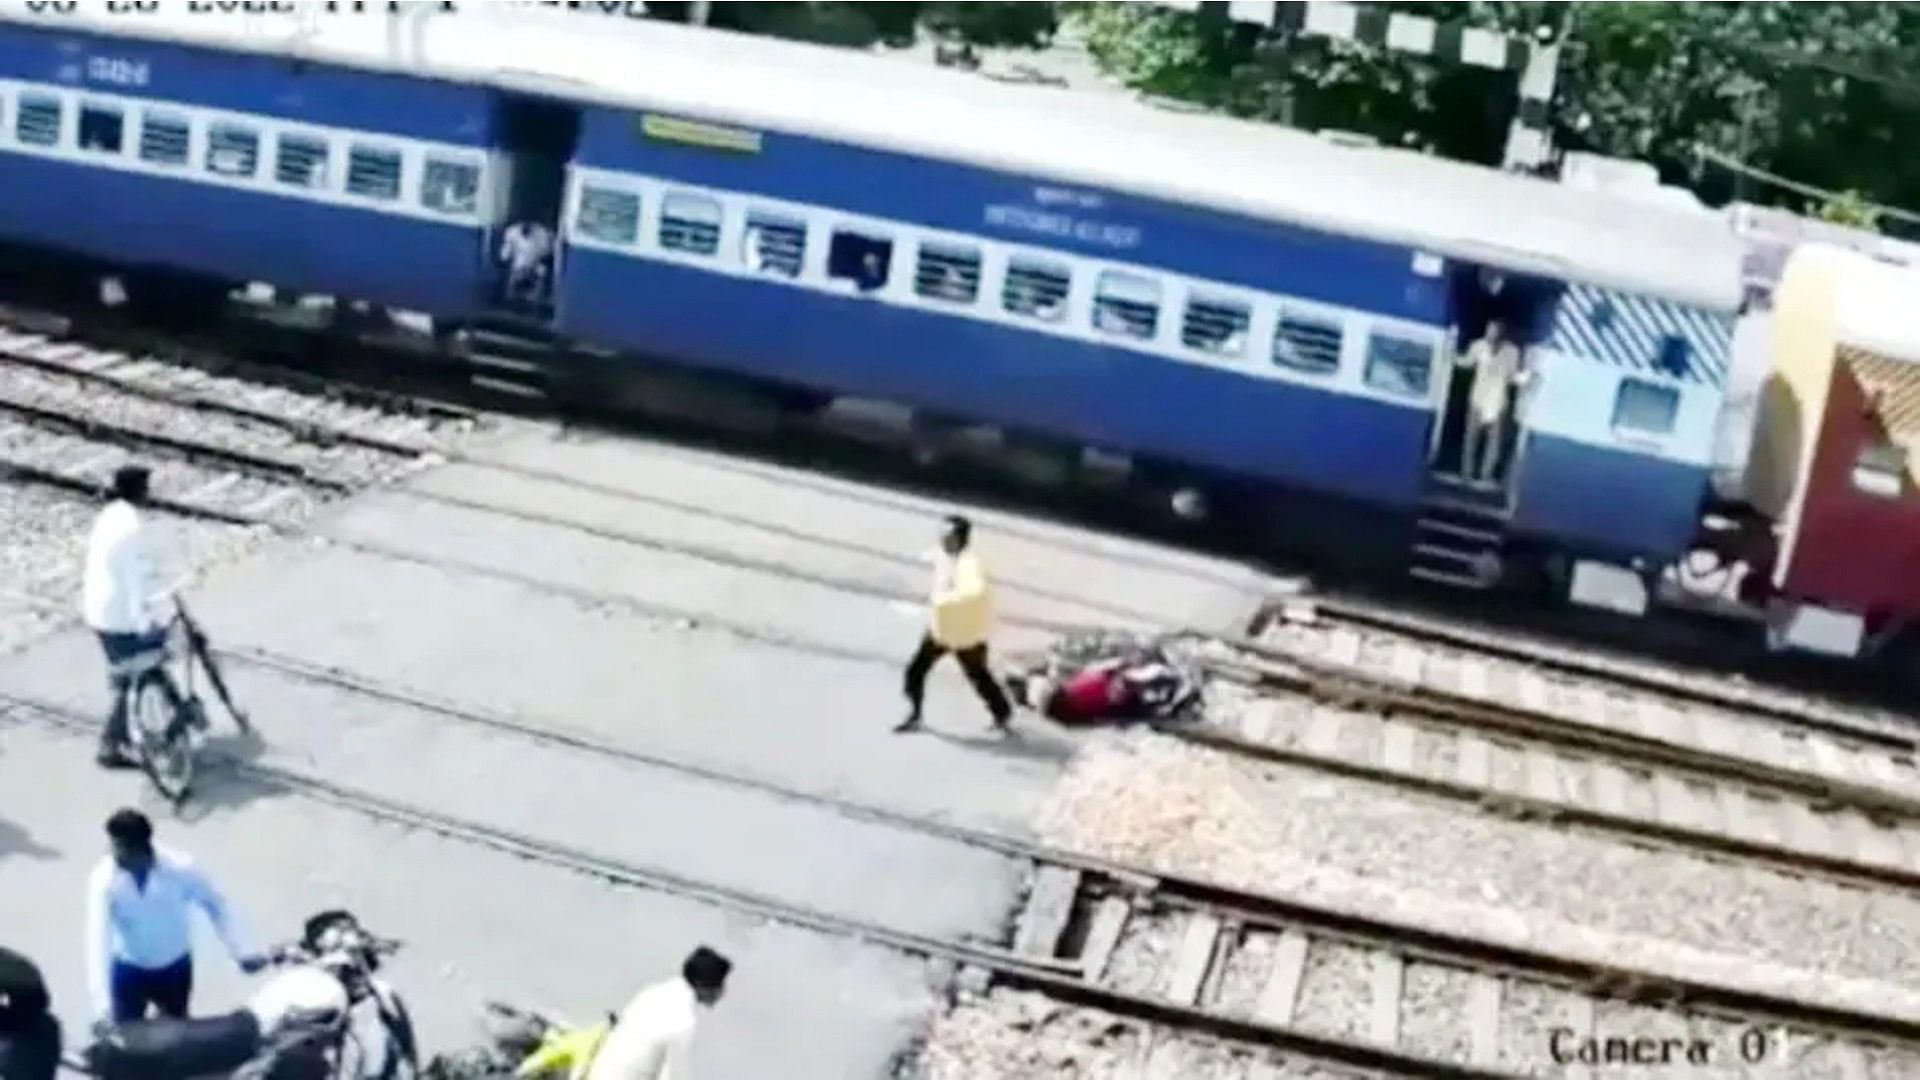 The train coming at a speed of 110 kmph caused damage to the bike etawah